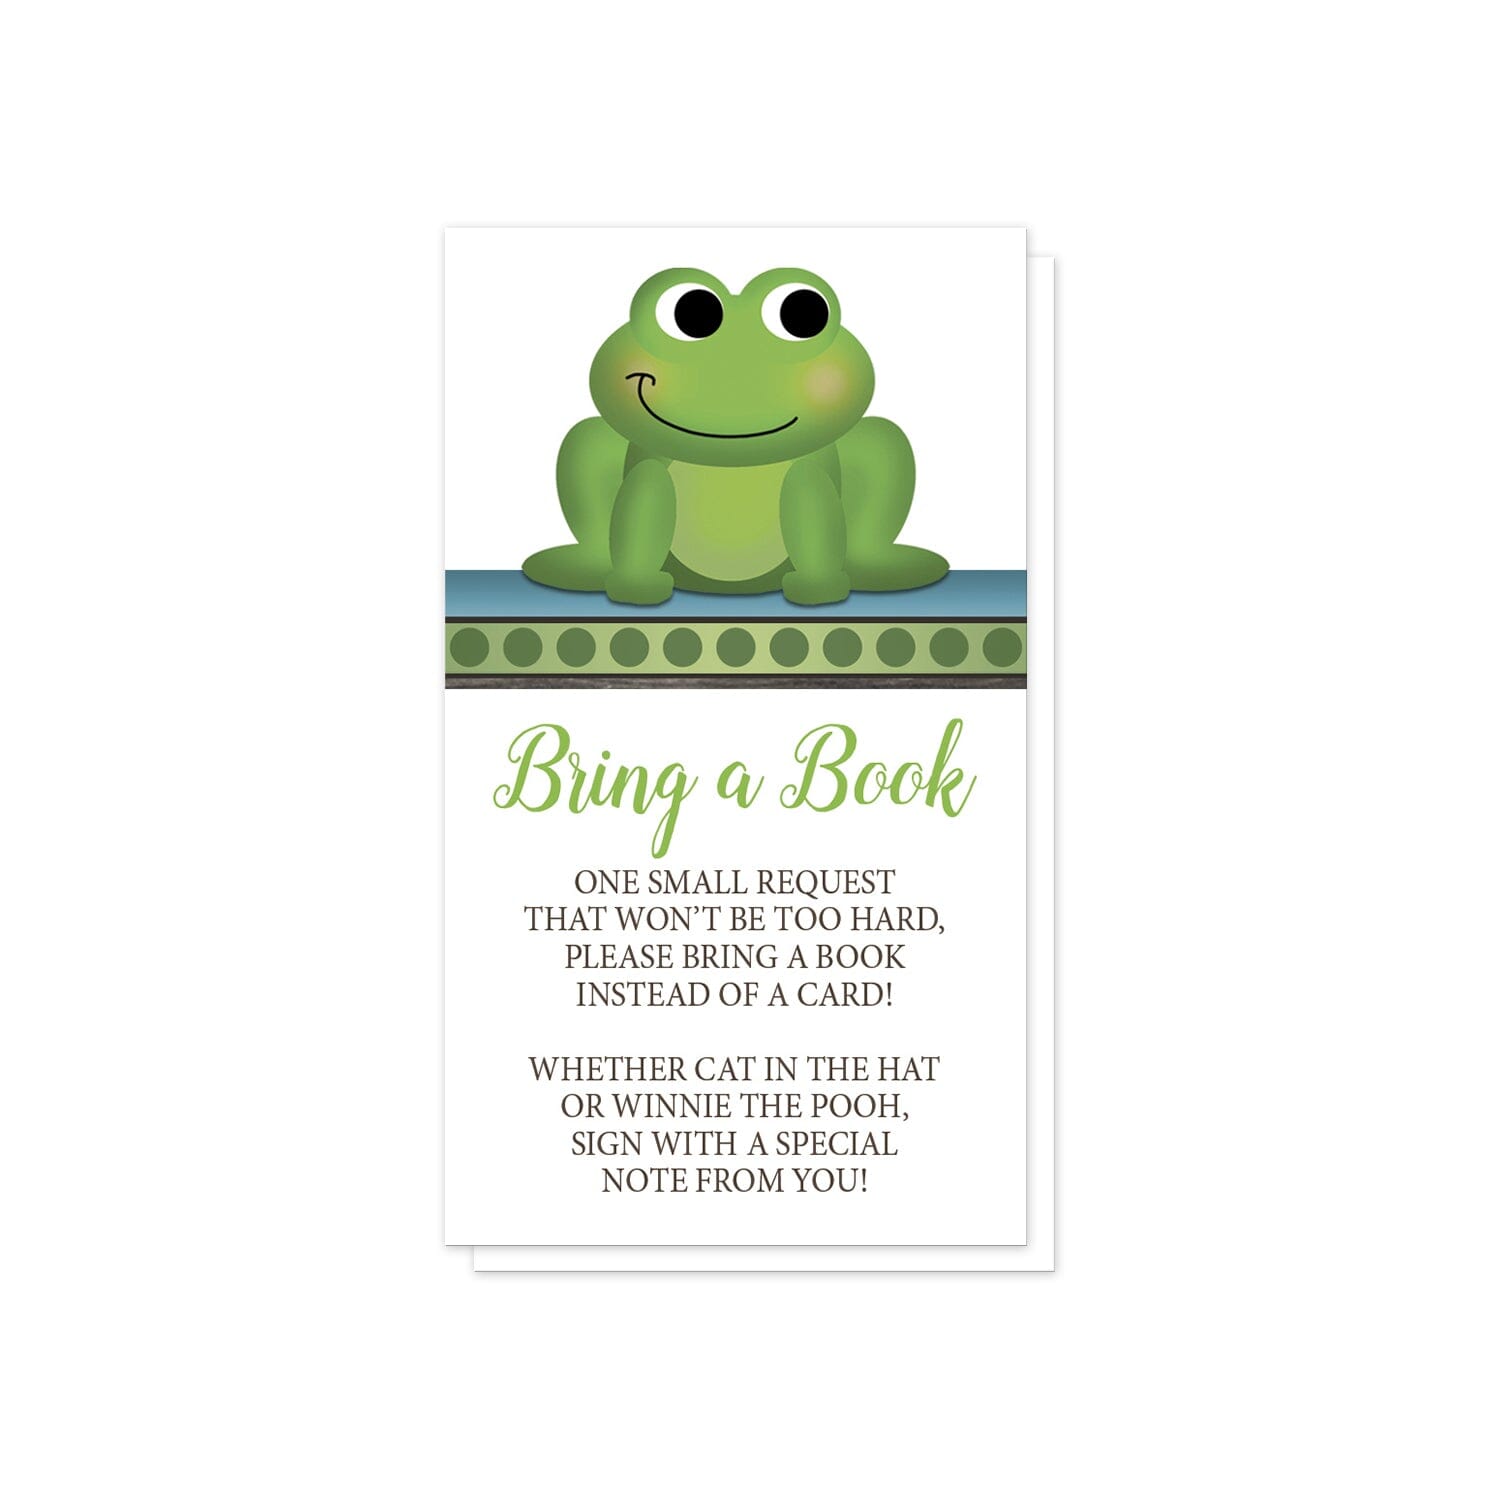 Cute Frog Green Rustic Brown Bring a Book Cards at Artistically Invited.